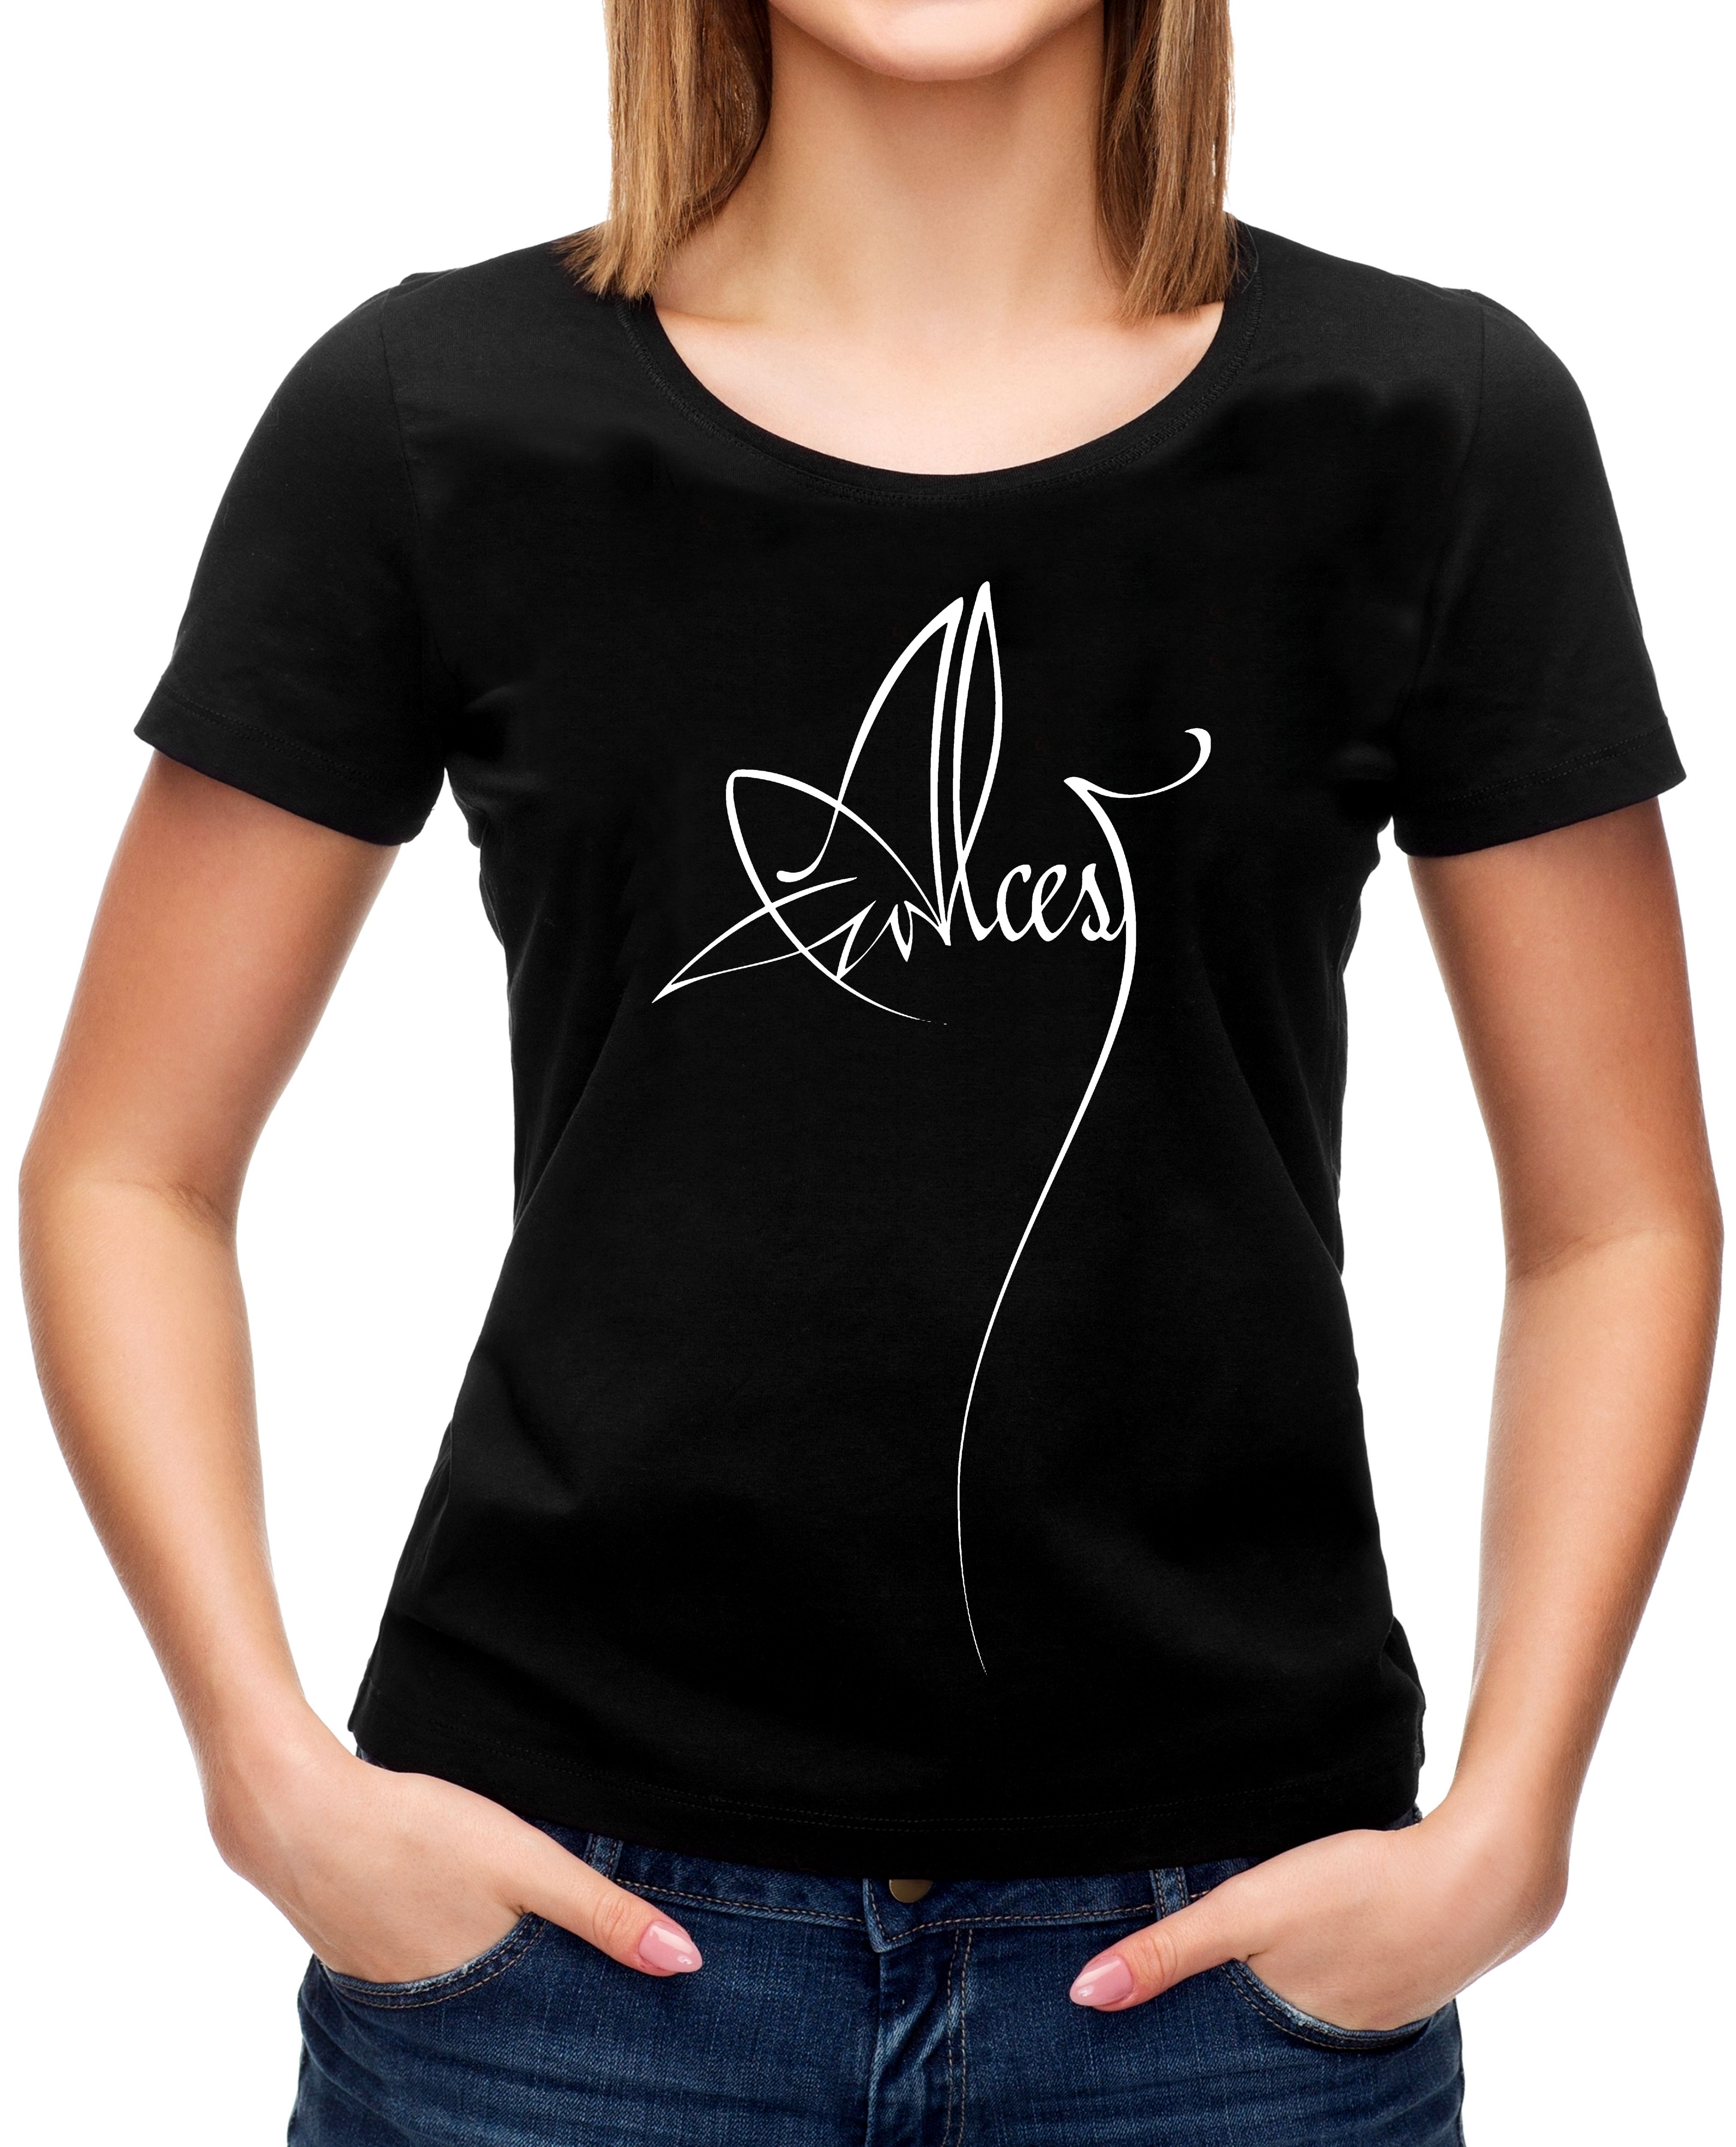 Alcest Logo Girlie T-Shirt – Metal & Rock T-shirts and Accessories